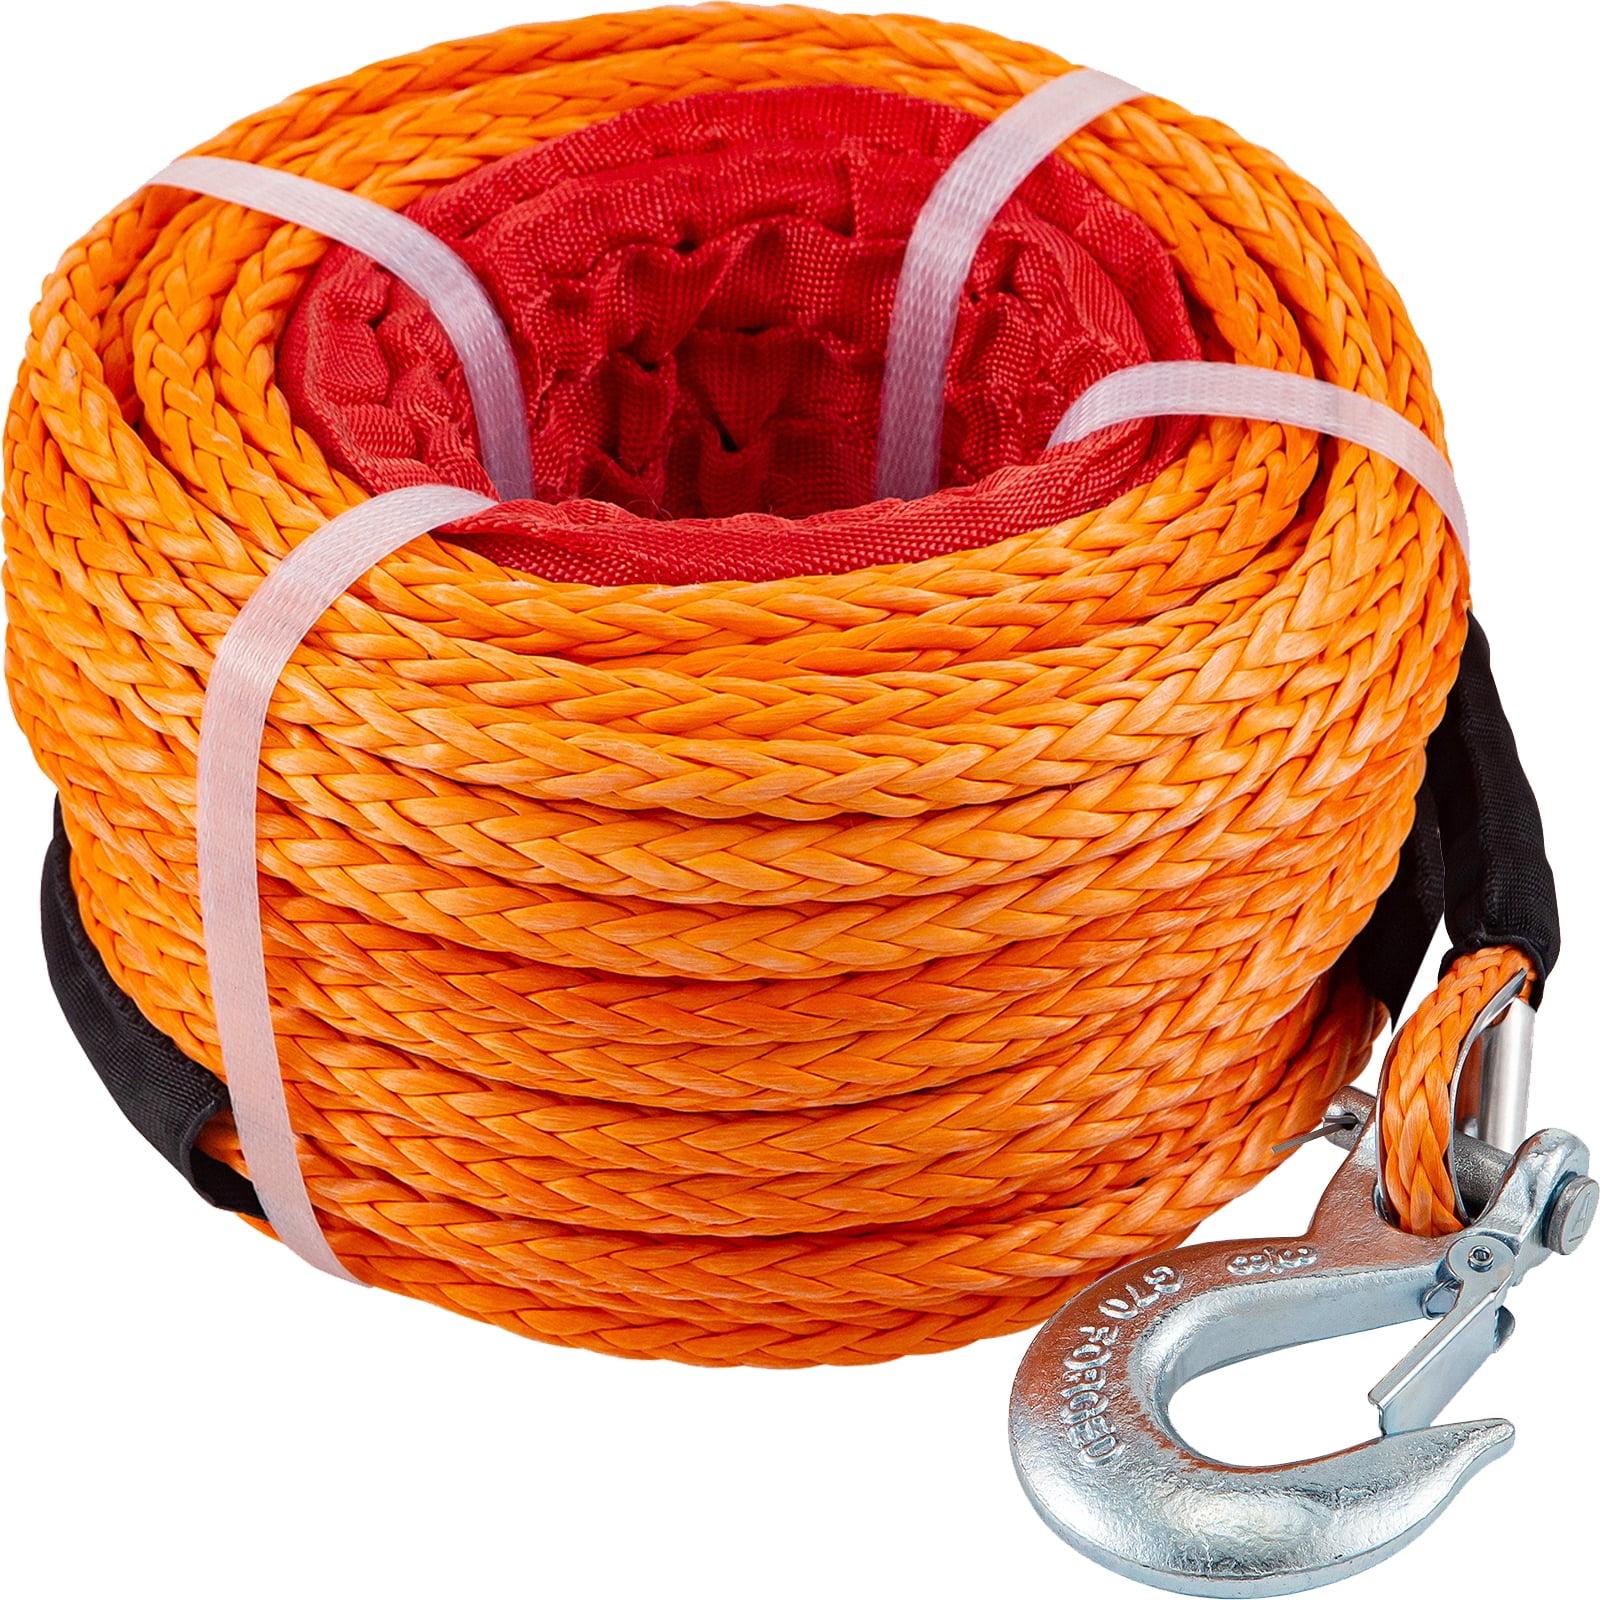 Attwood 11739-2 Poly Winch Rope with Steel Hook (3/8-Inch x 20-Feet)